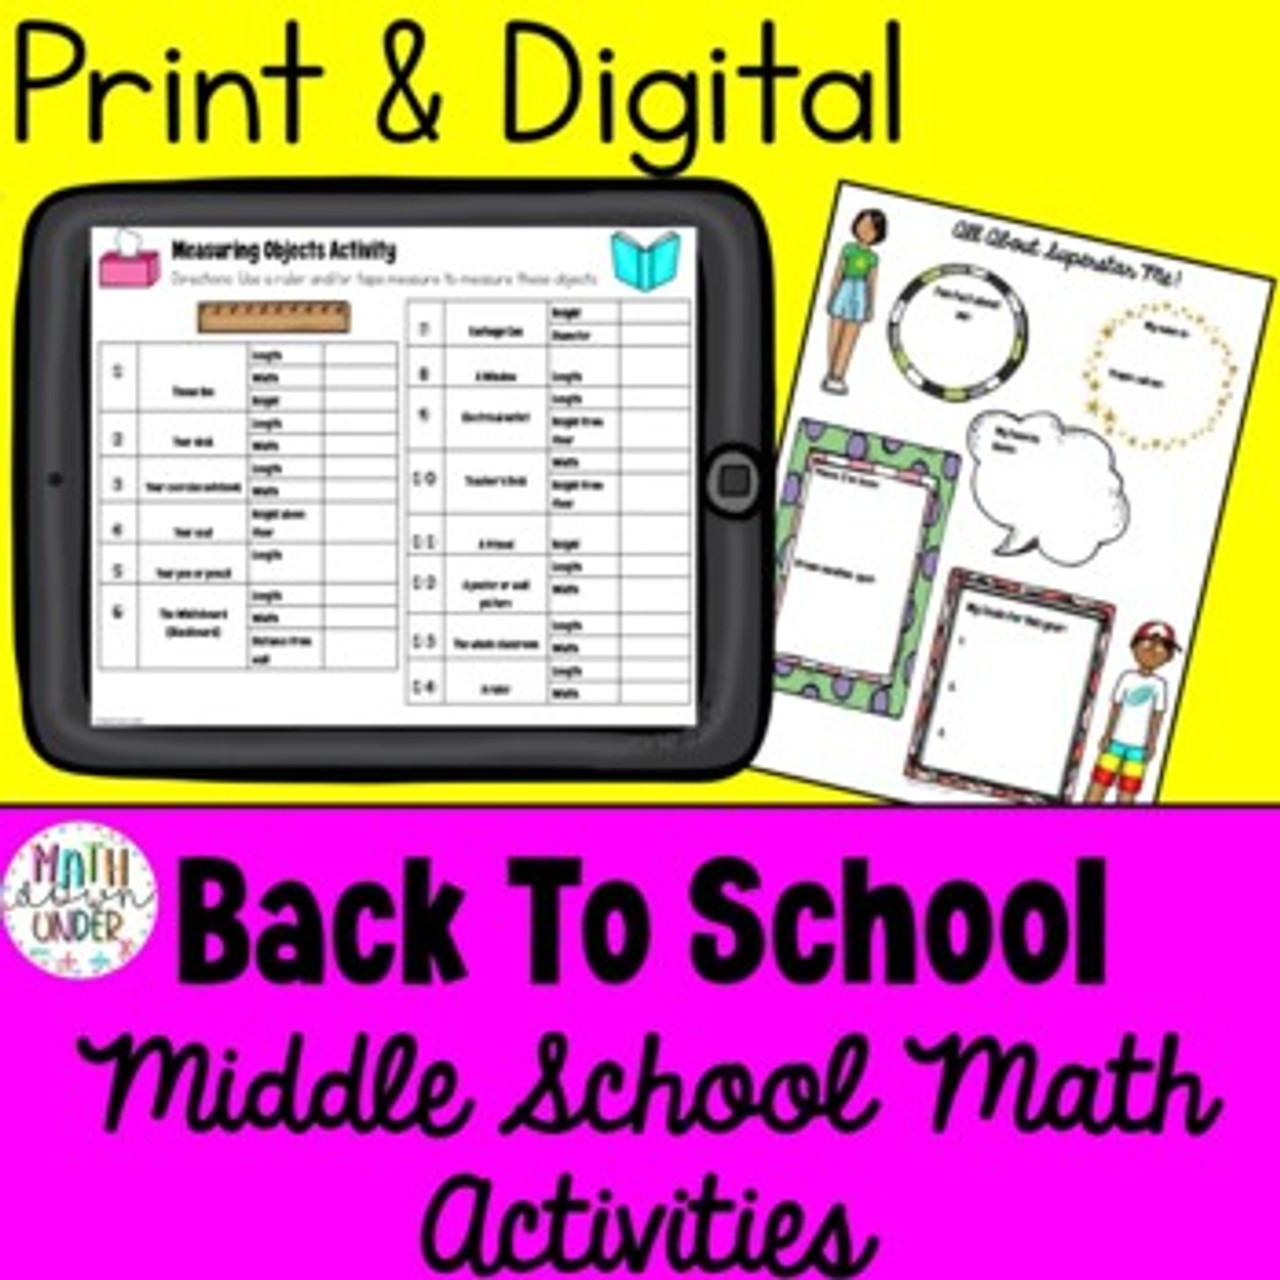 Back To School Math Activities for Middle School - PDF & Digital